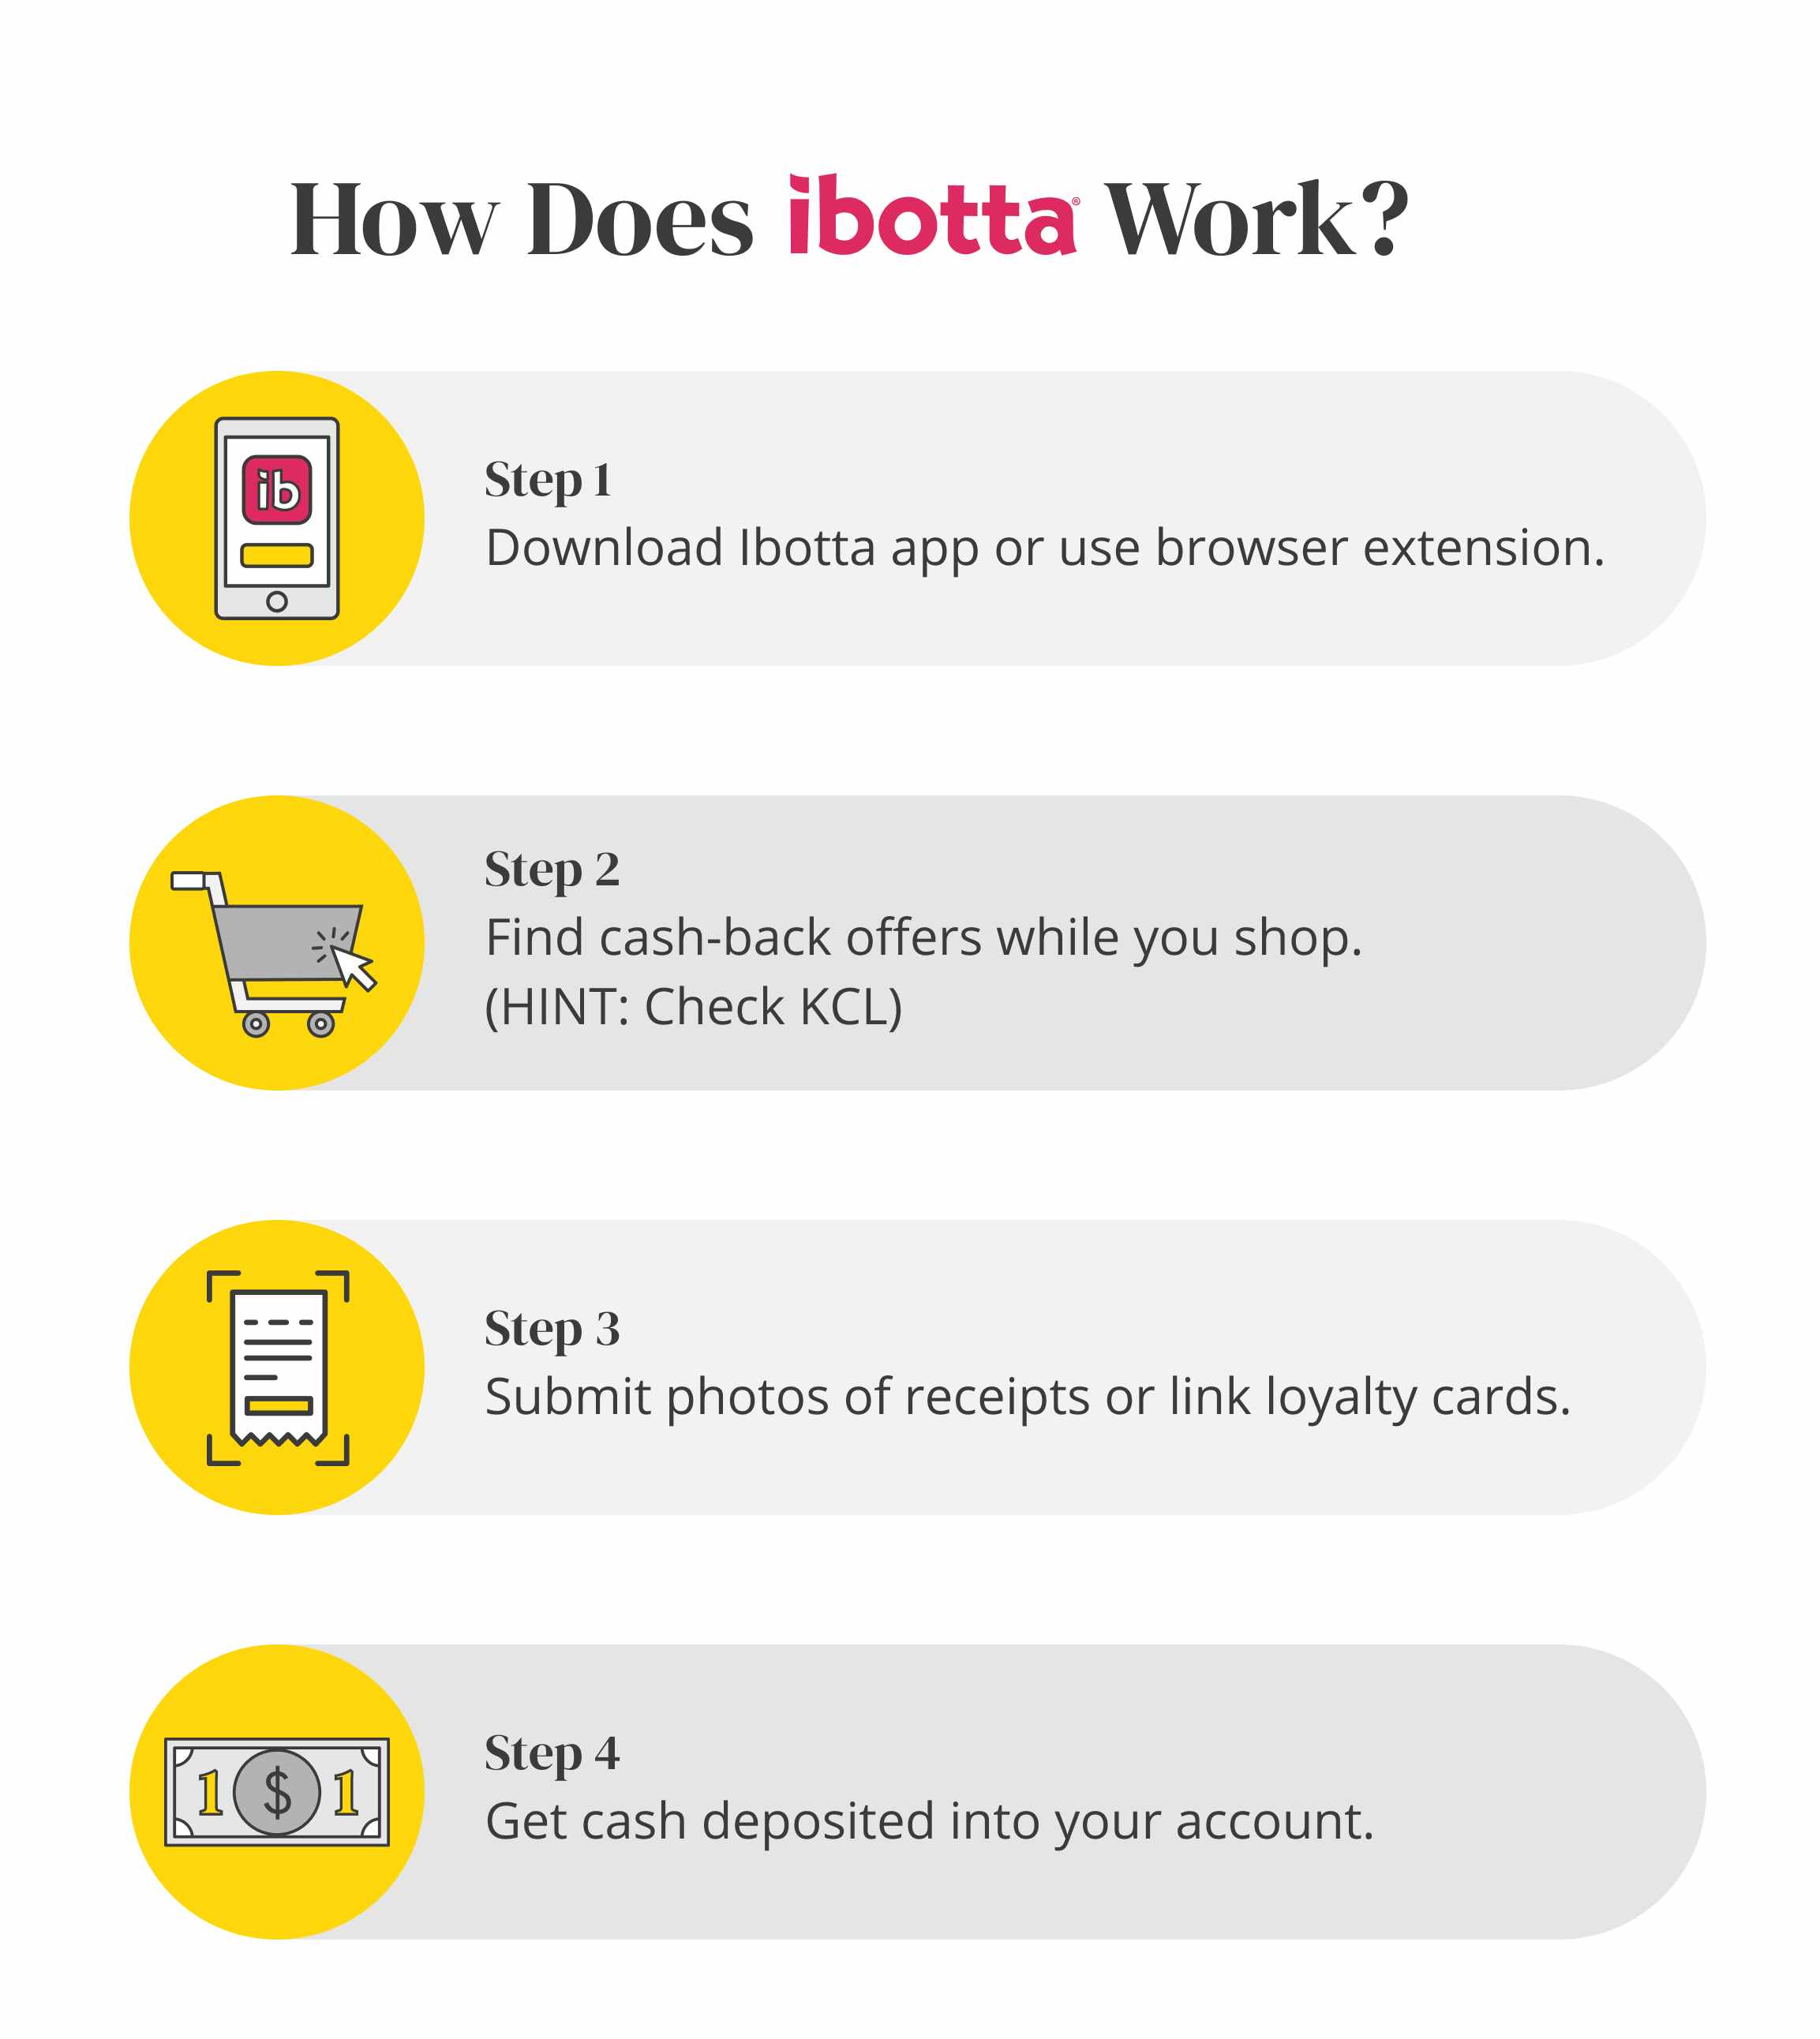 How Does Ibotta Work? Here are the four easy steps for downloading the app, finding offers, submitting receipts, and getting rebates.